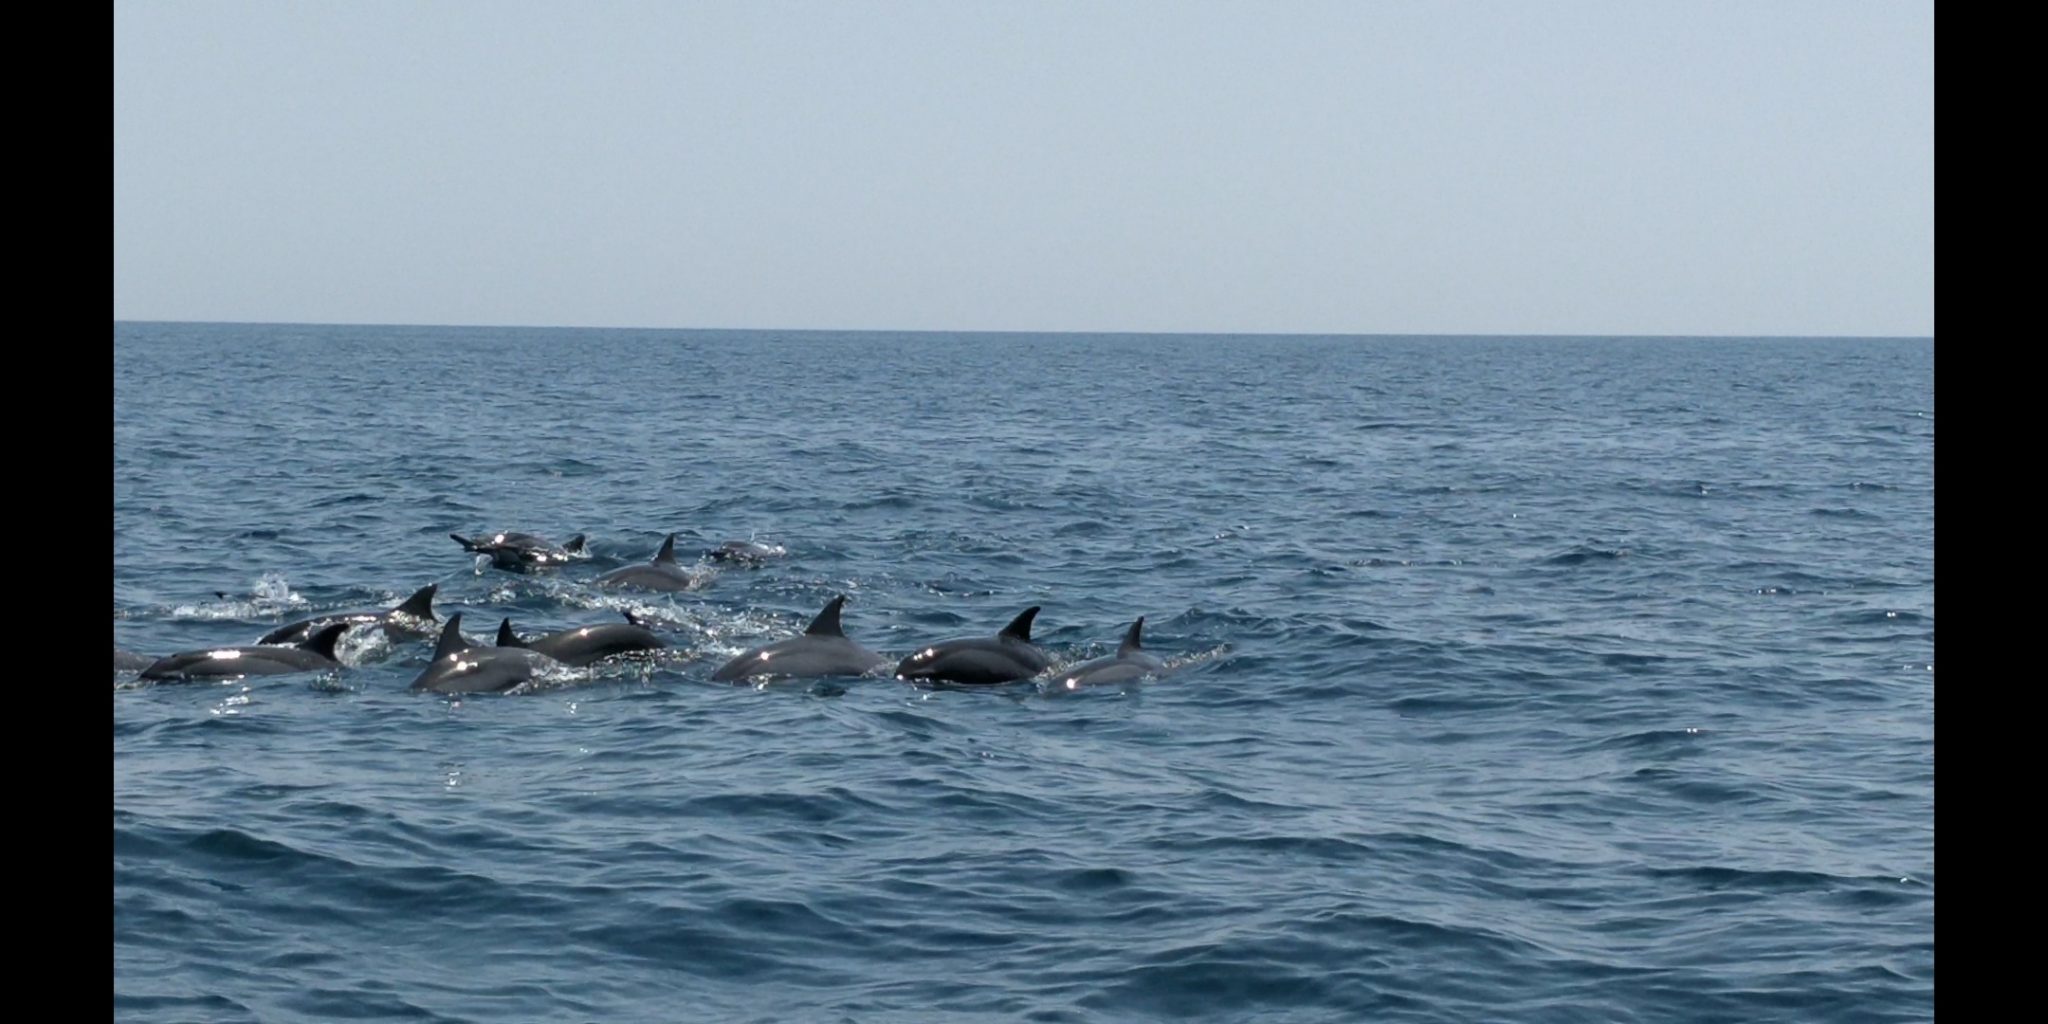 20. Dolphin Watching